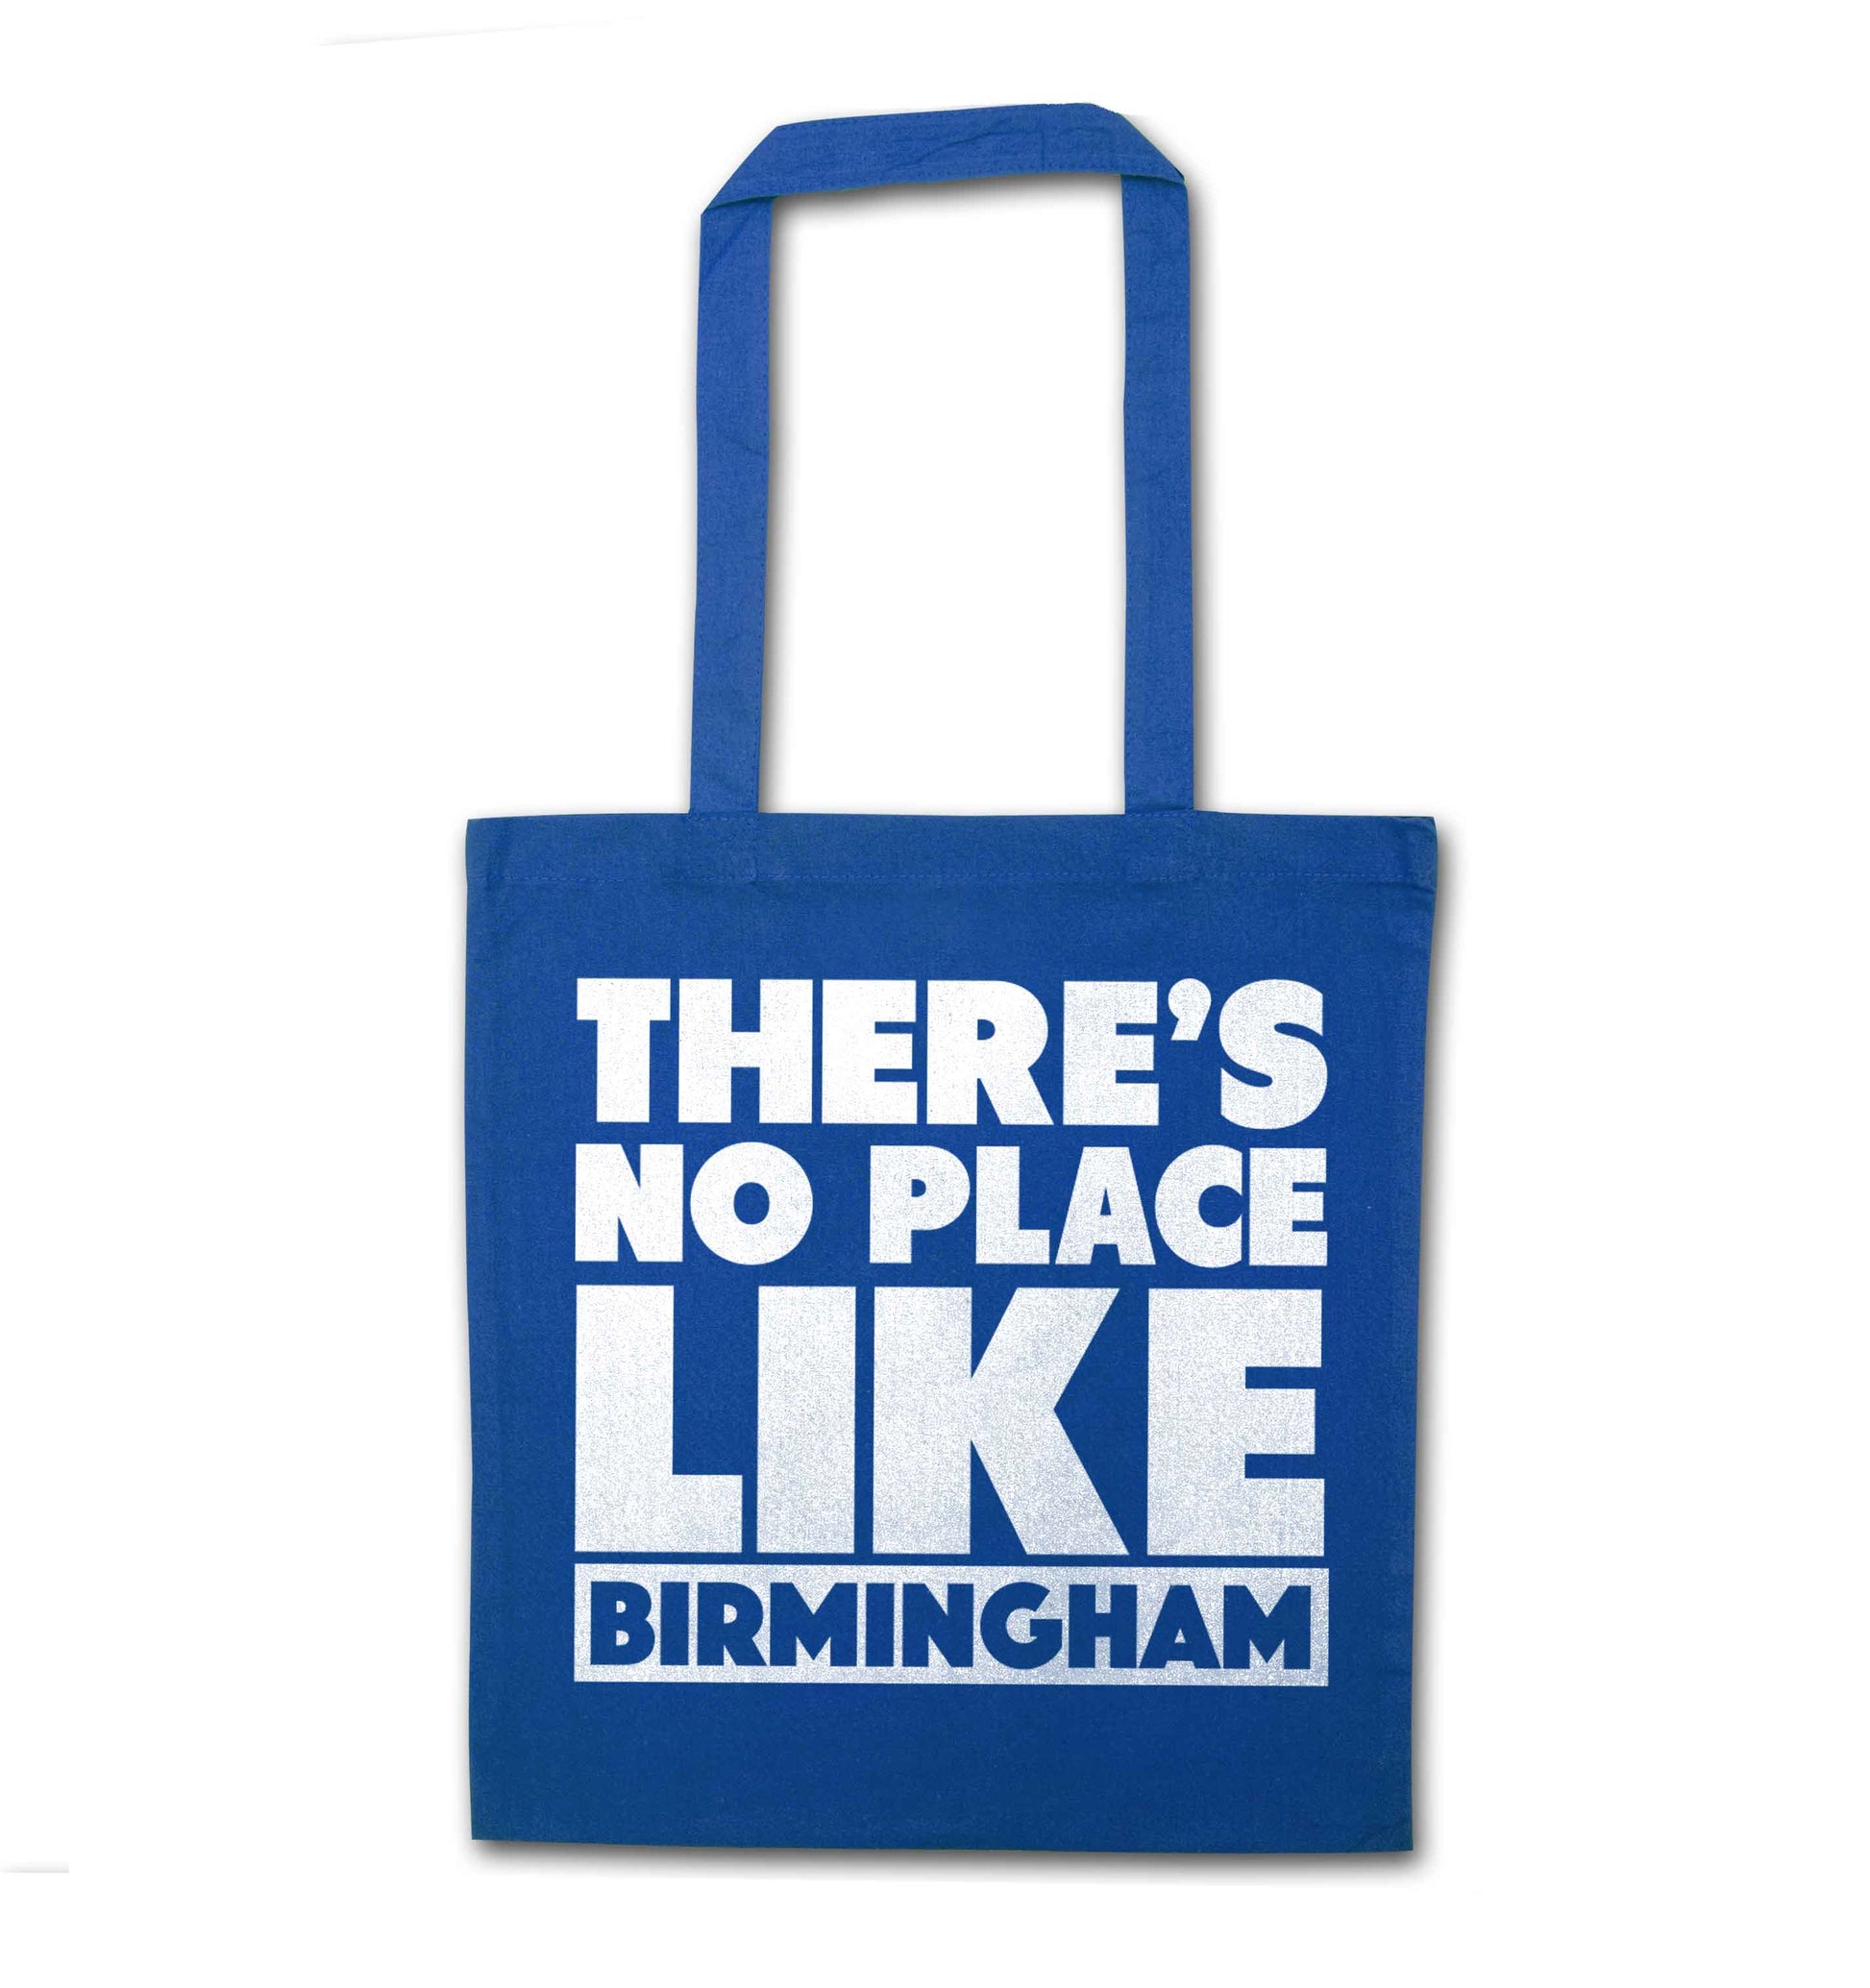 There's no place like Birmingham blue tote bag